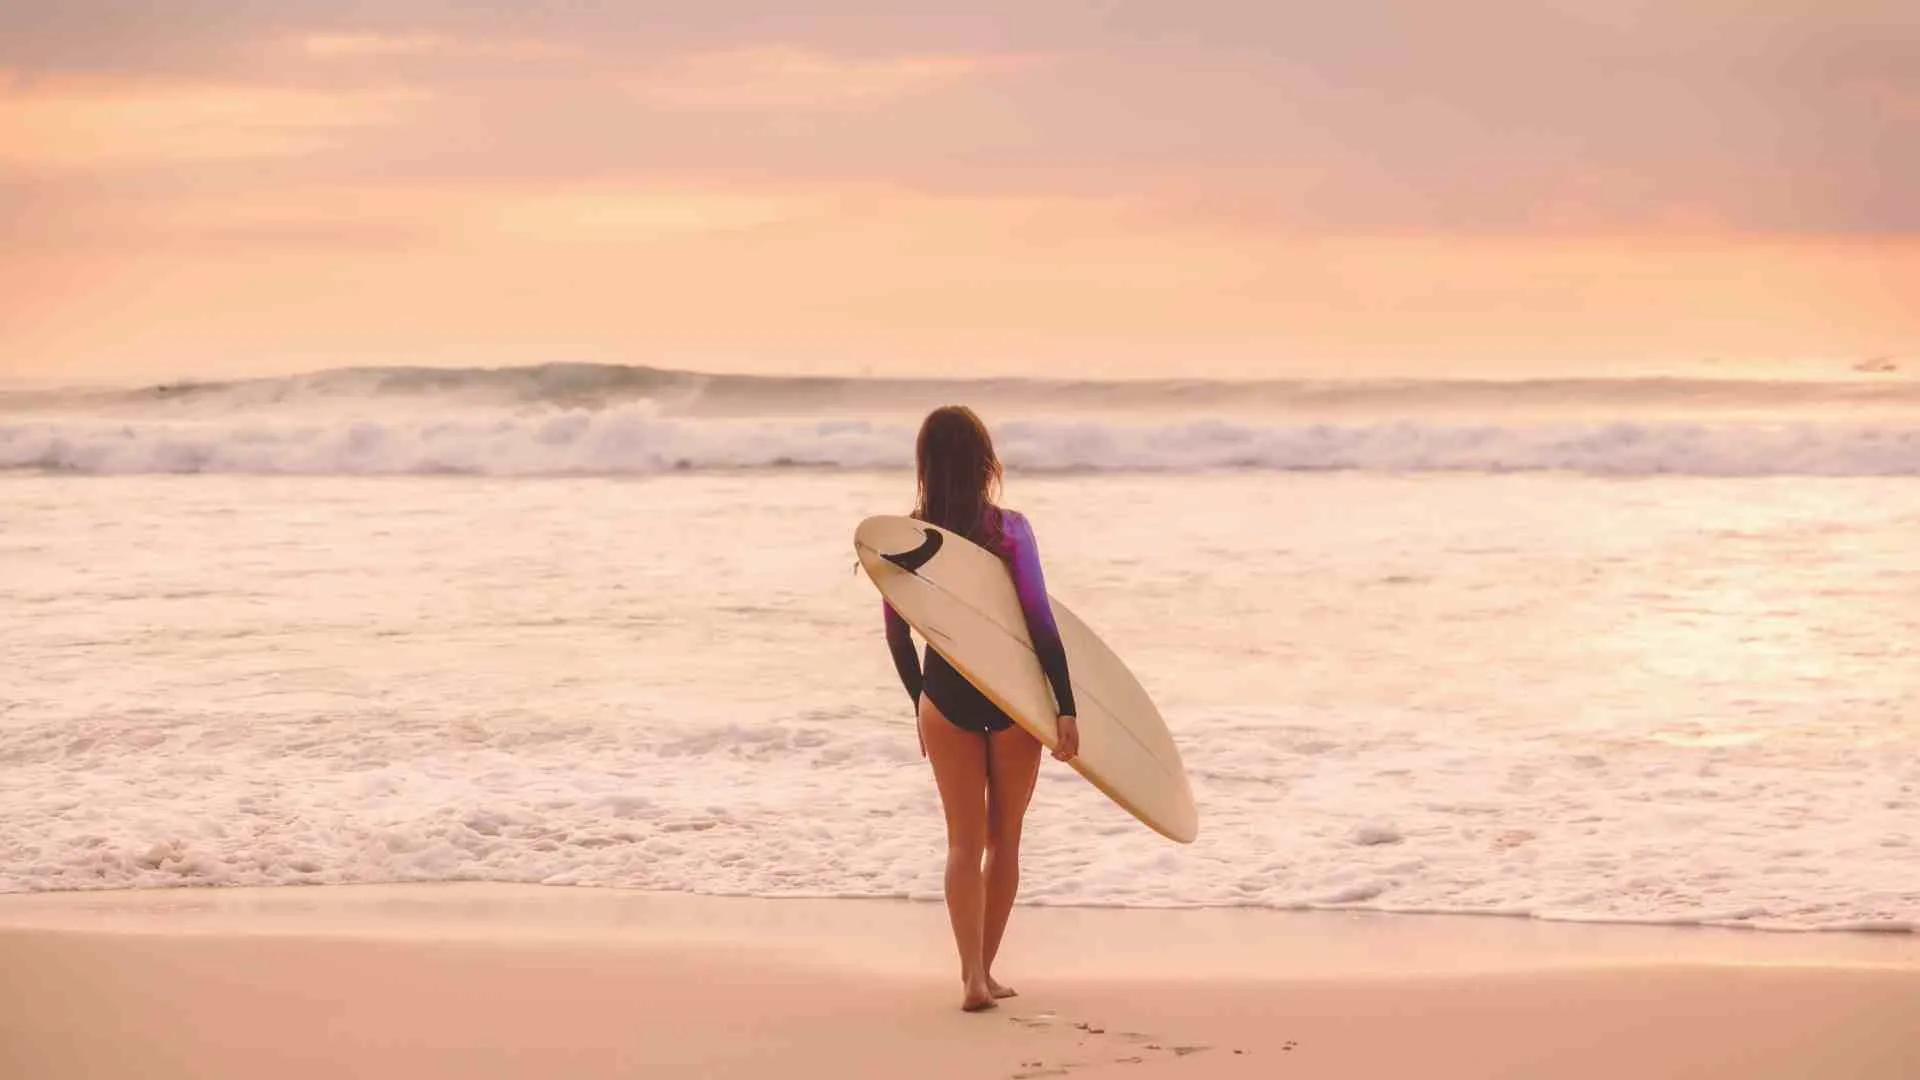 walking into the ocean with a surfboard